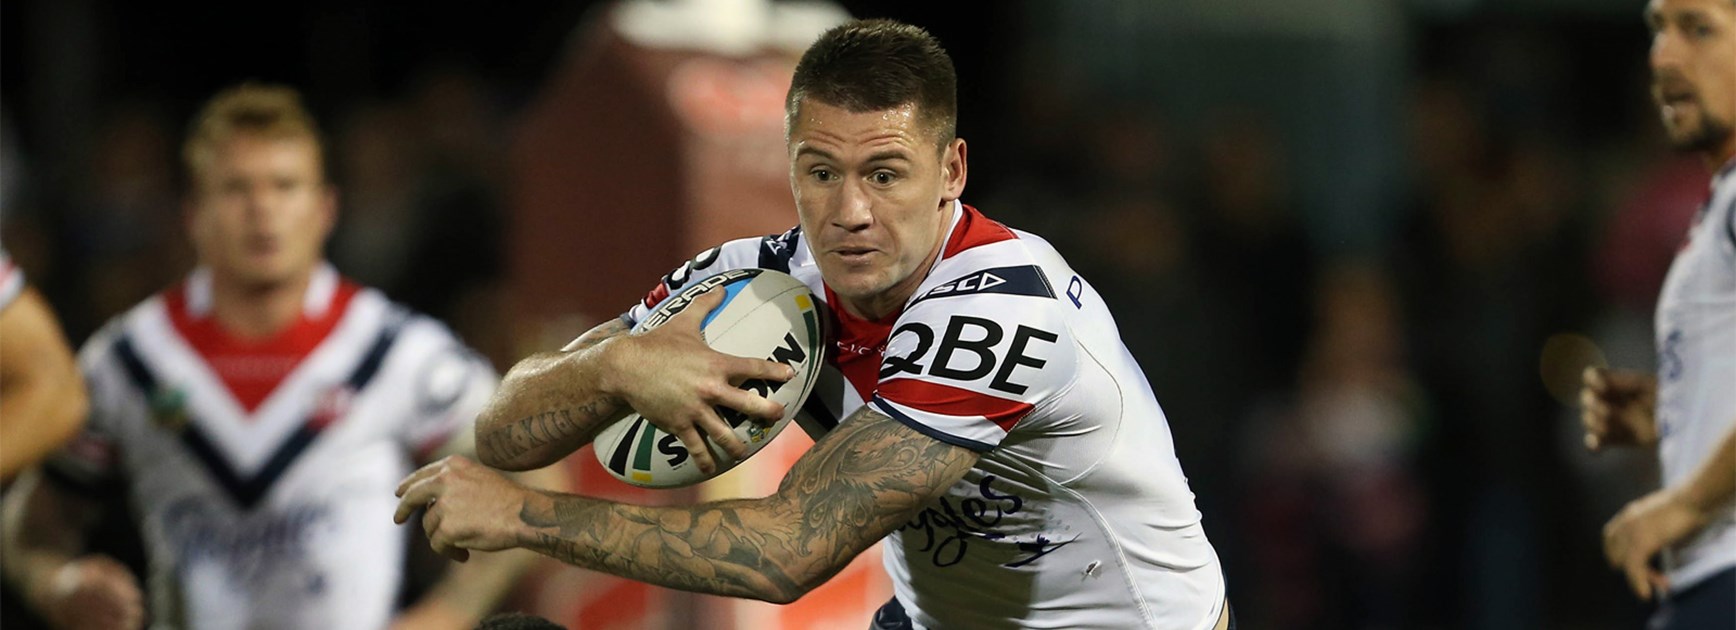 Shaun Kenny-Dowall scored a double in the Roosters' win over Penrith on Saturday.